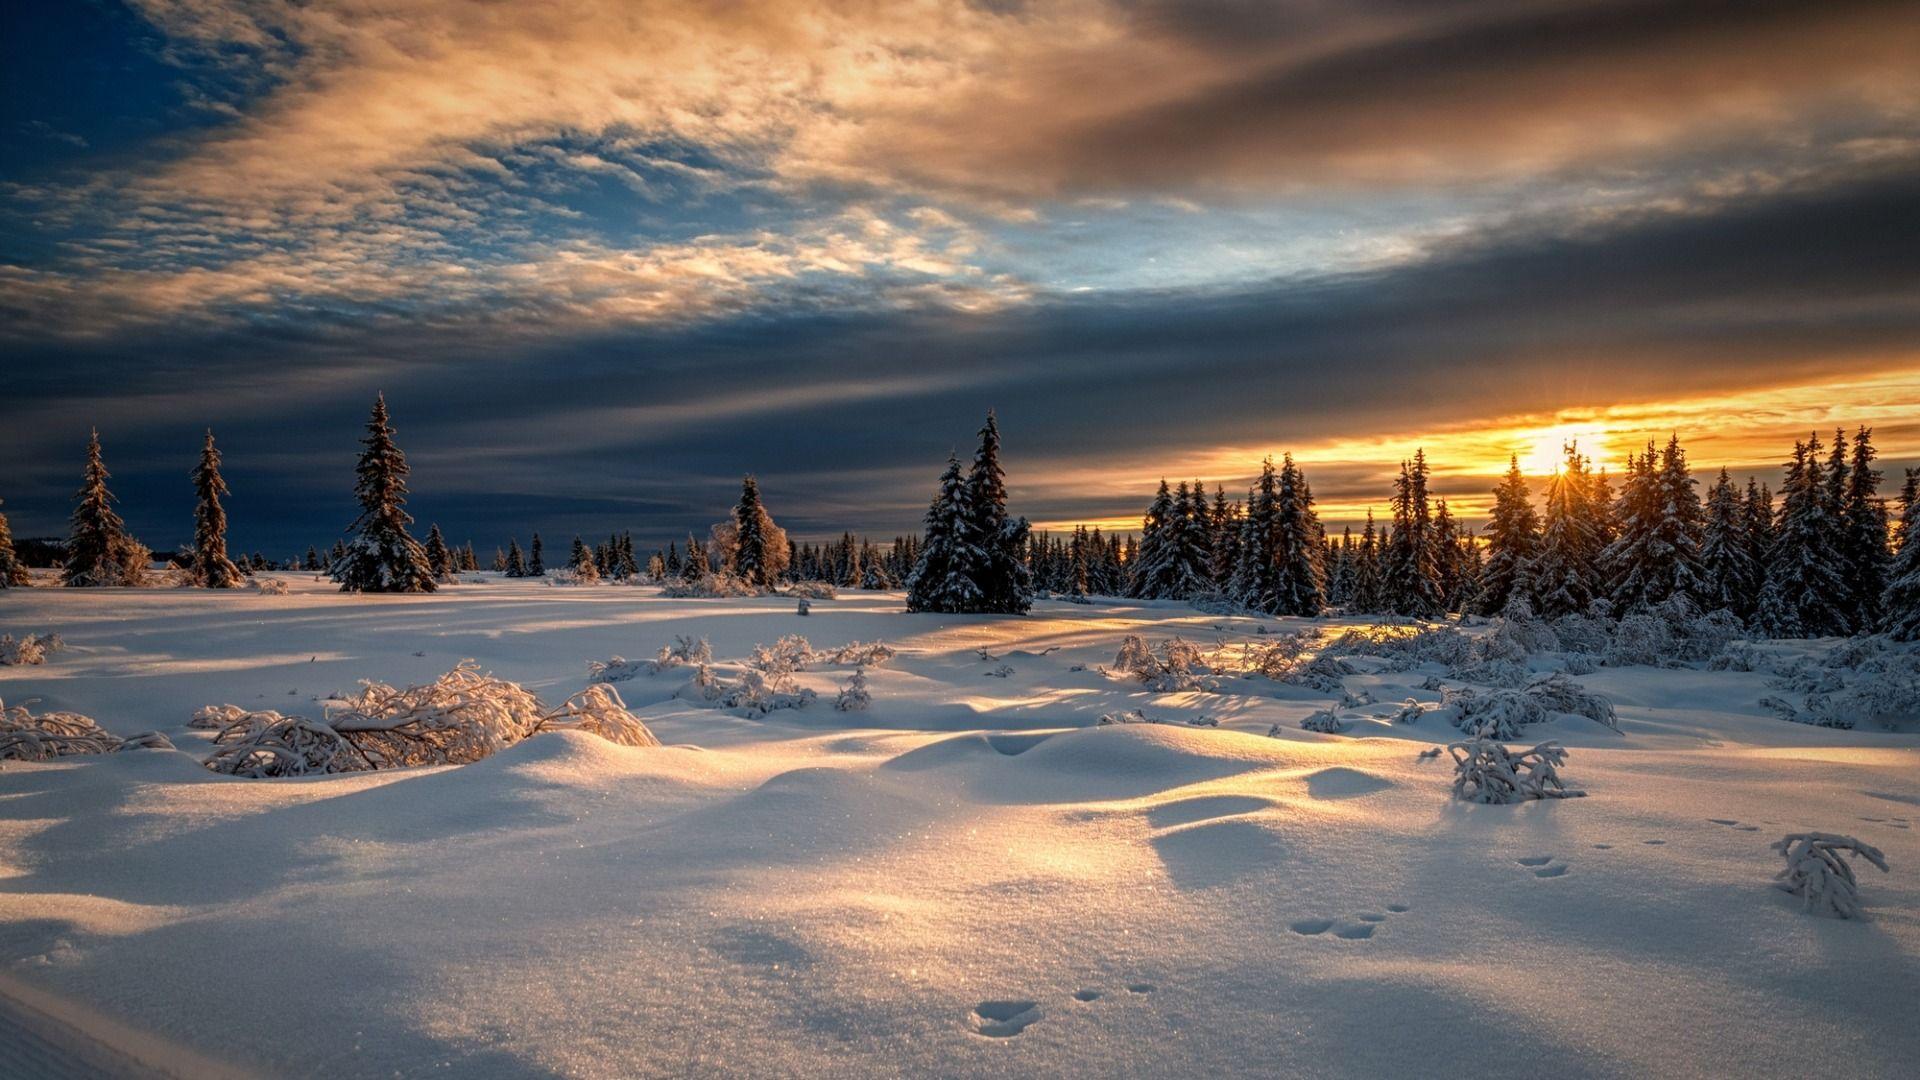 Download Wallpaper winter, forest, snow, sunset, Norway, Norway